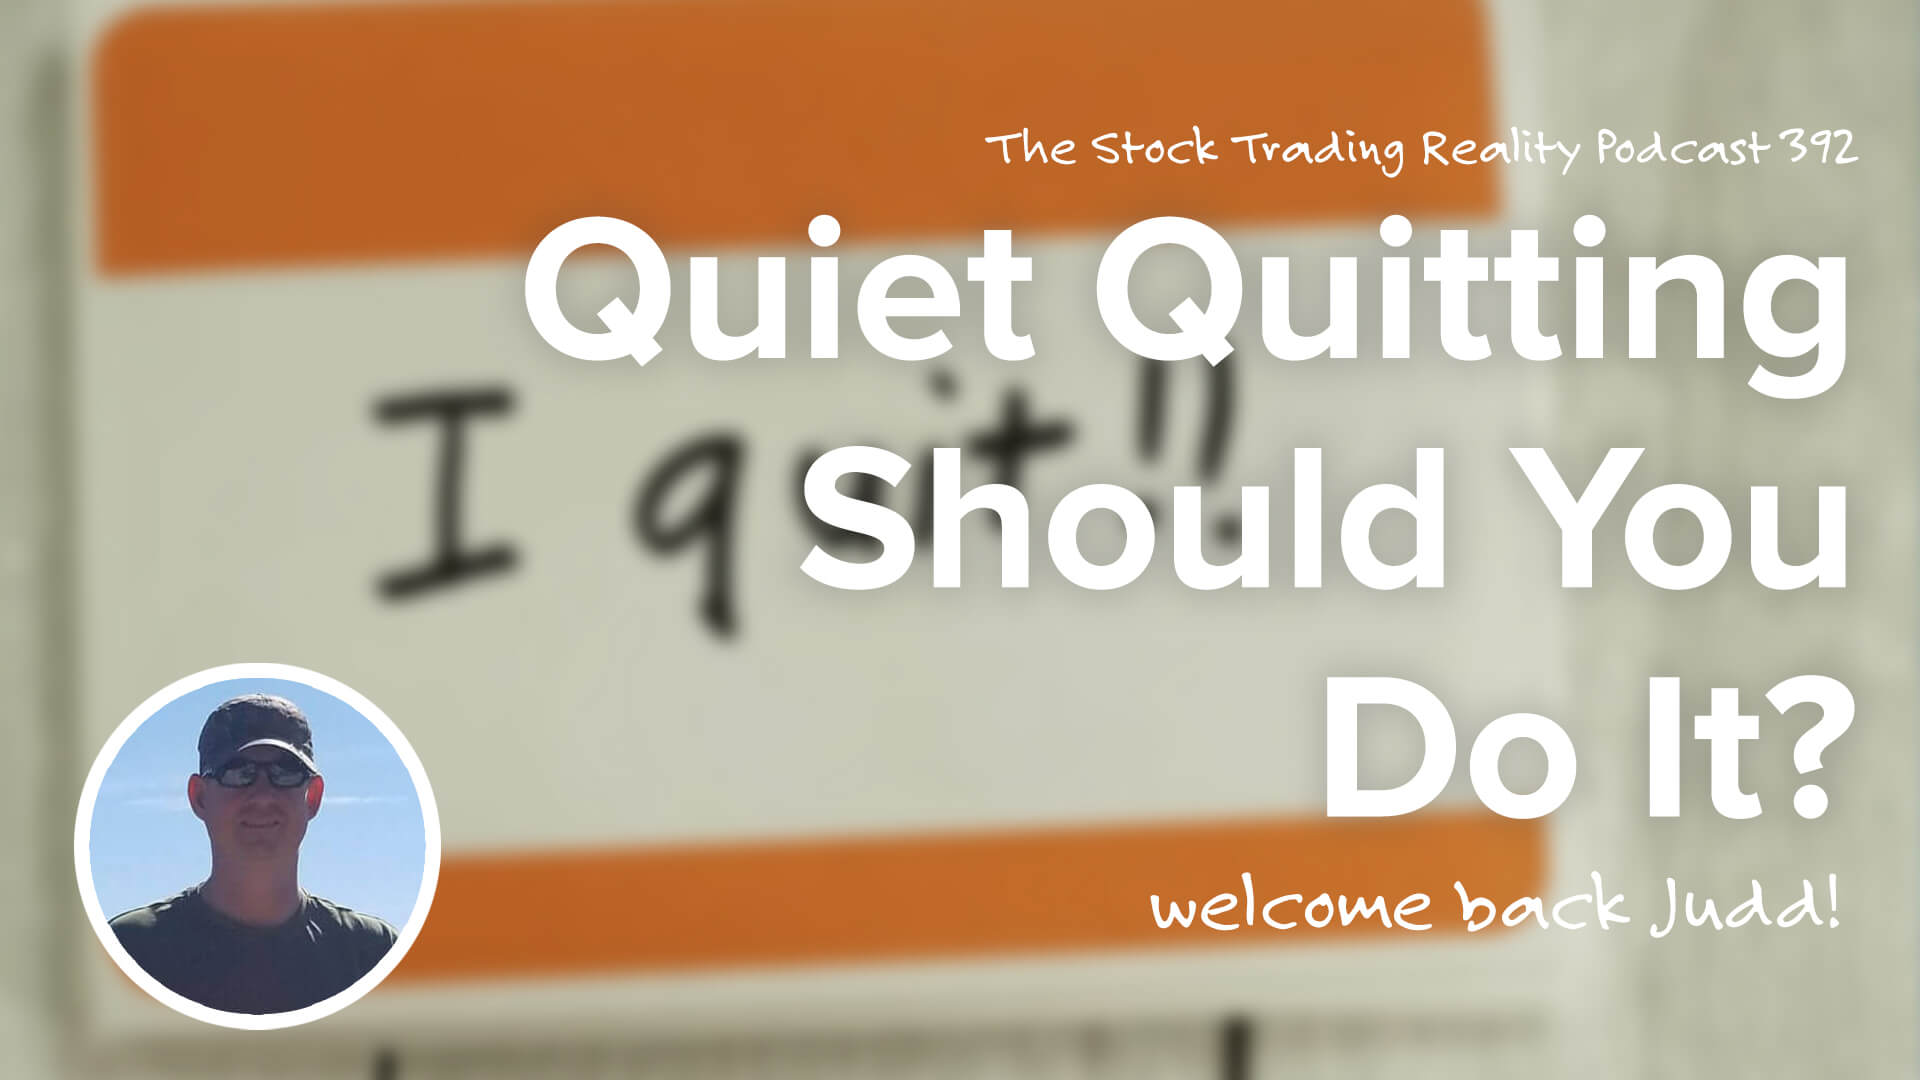 “Quiet Quitting” - Should You Do It?